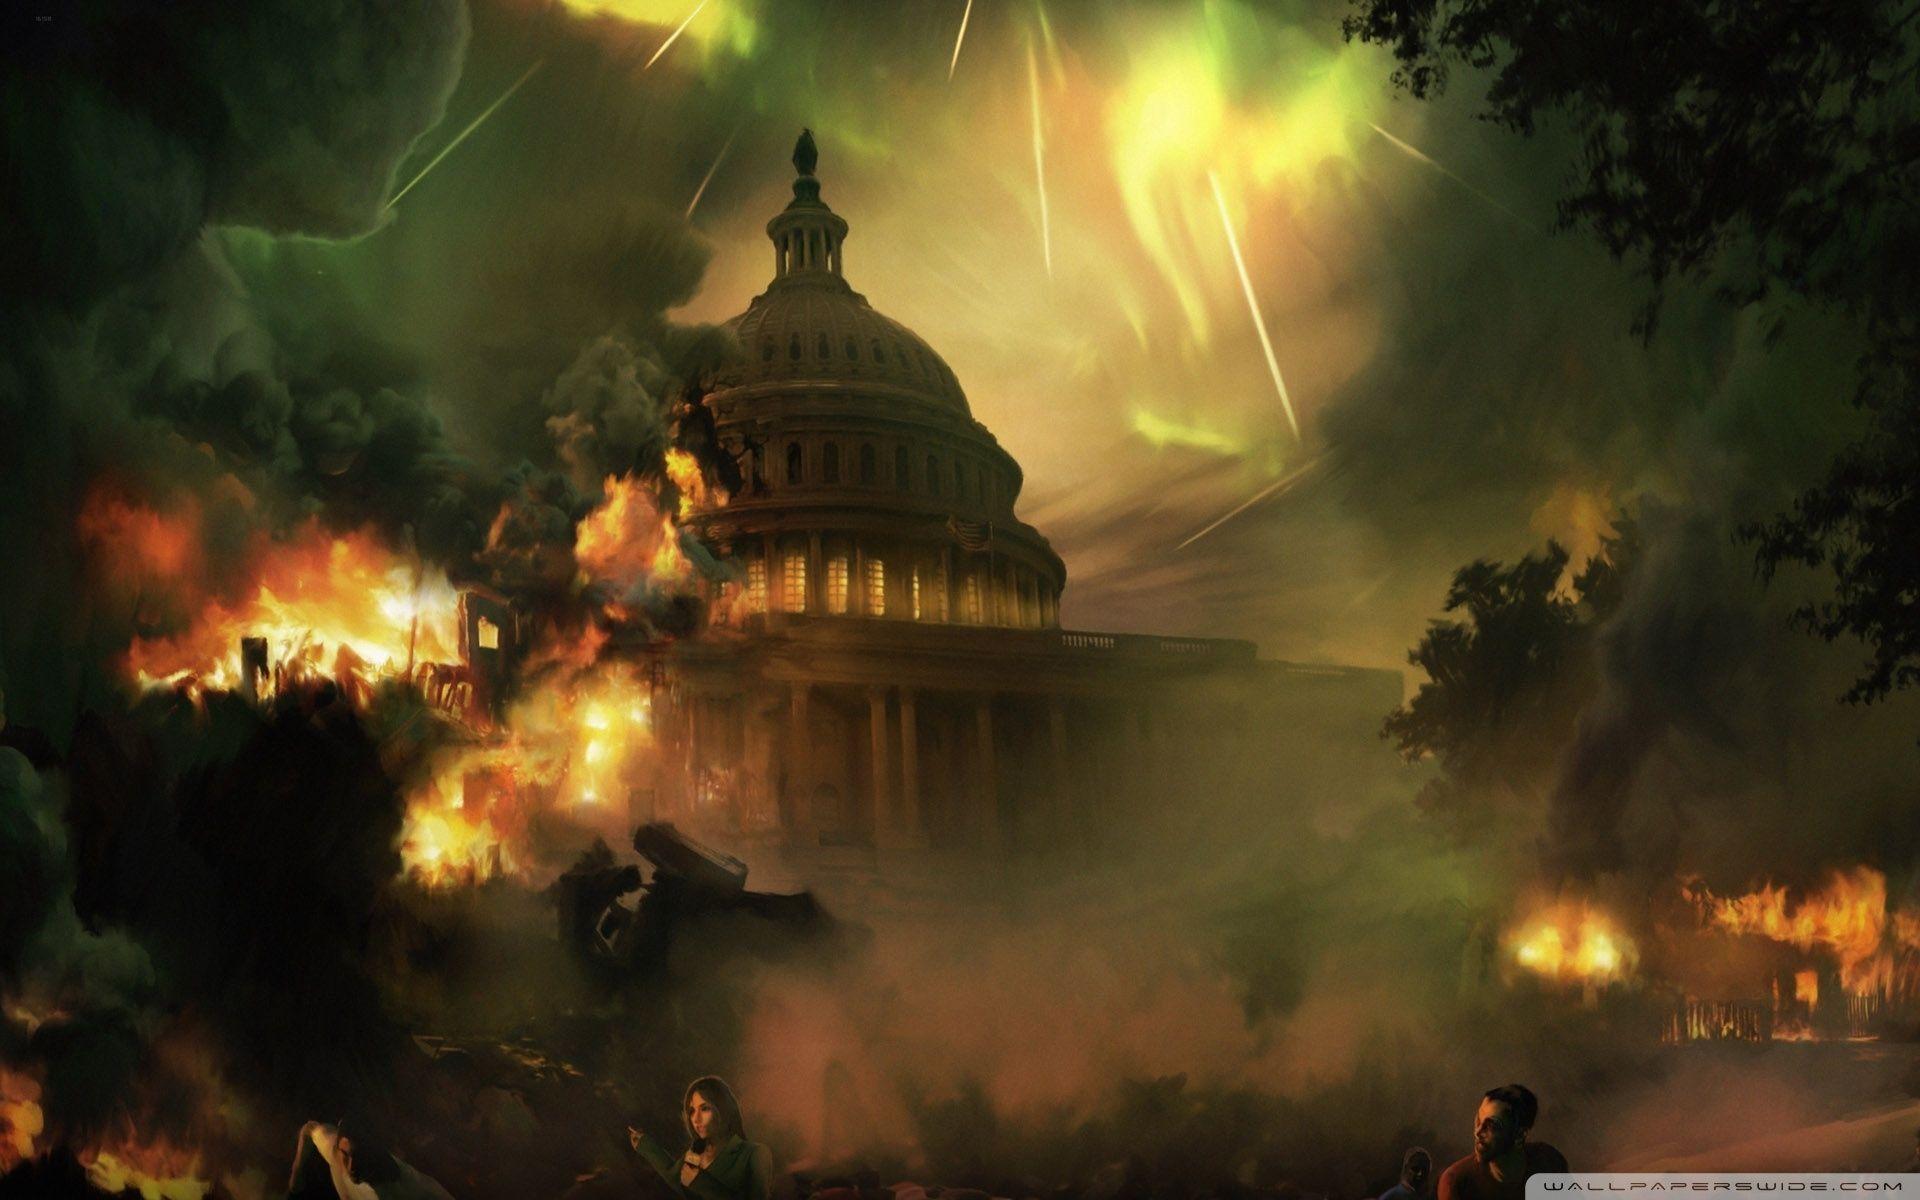  Earth end of the world apocalypse now apocalyptic wallpaper  127542